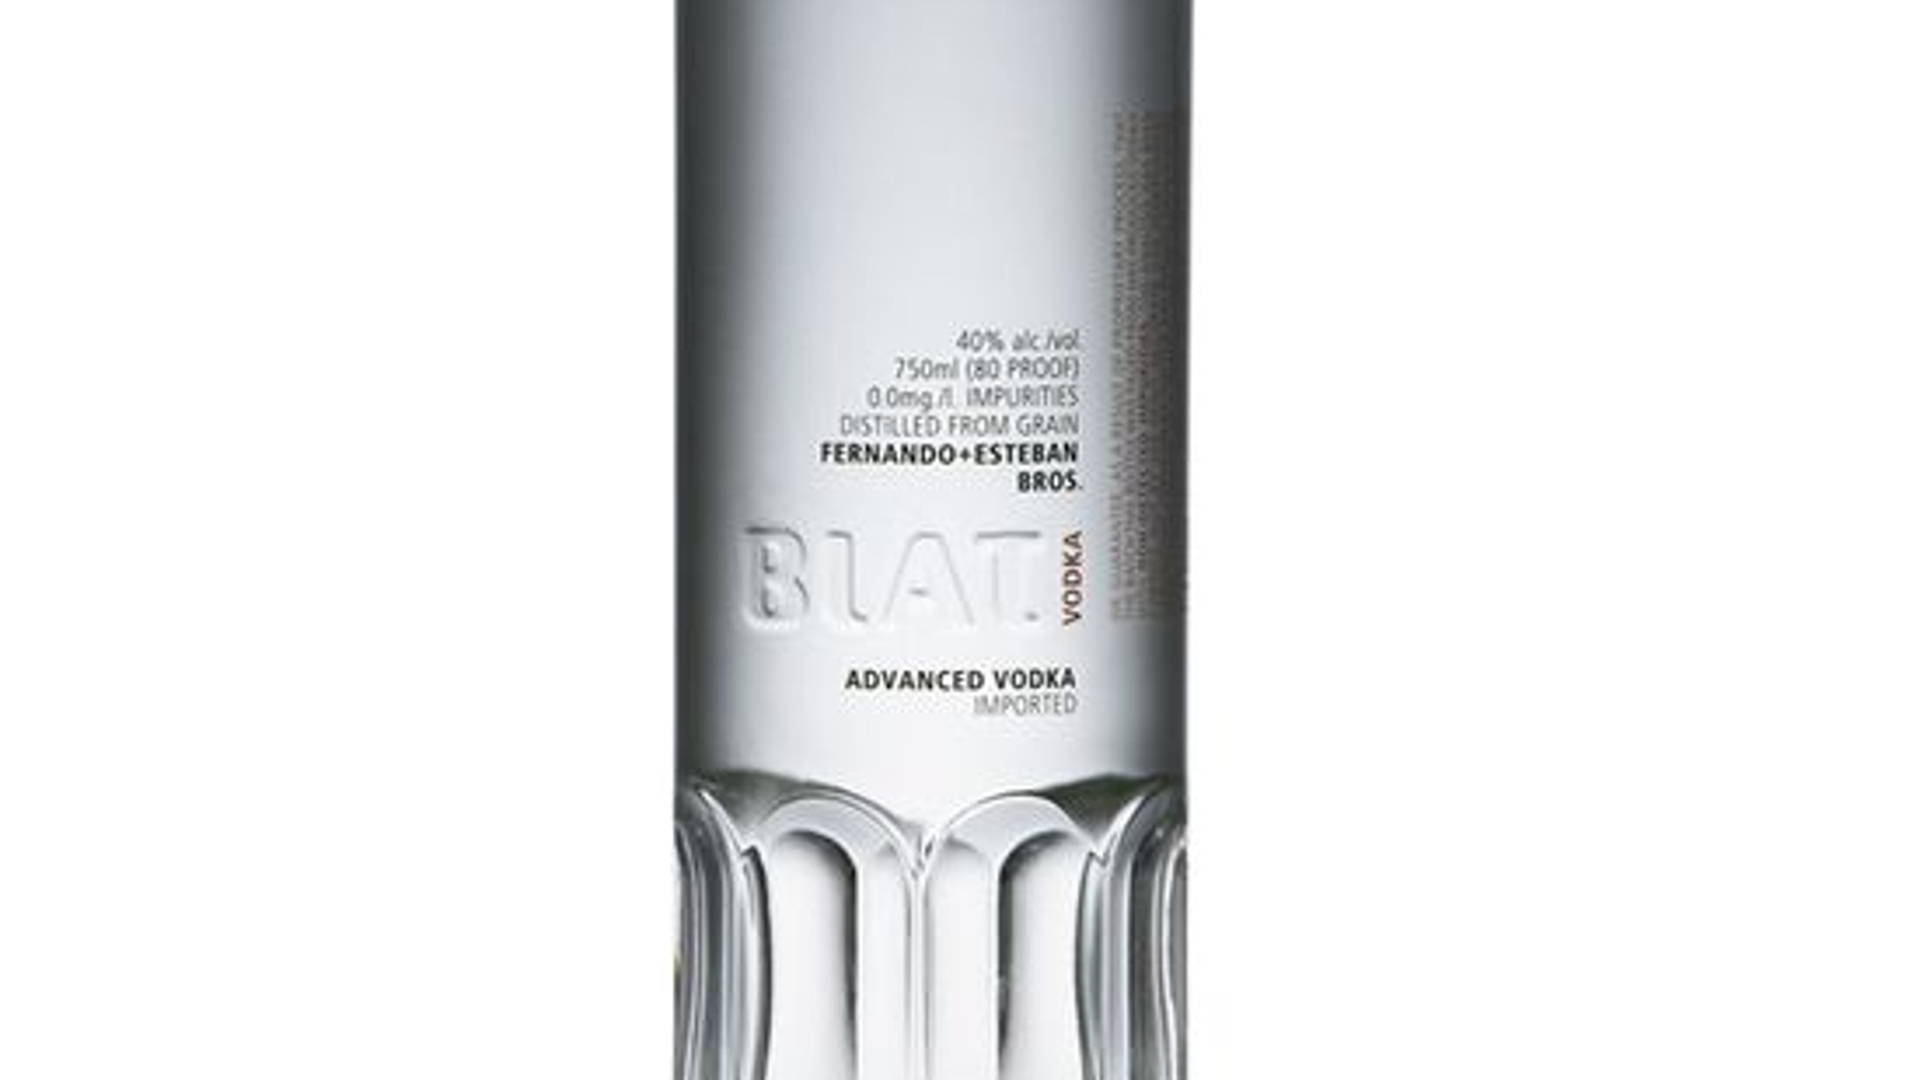 Featured image for Blat Vodka